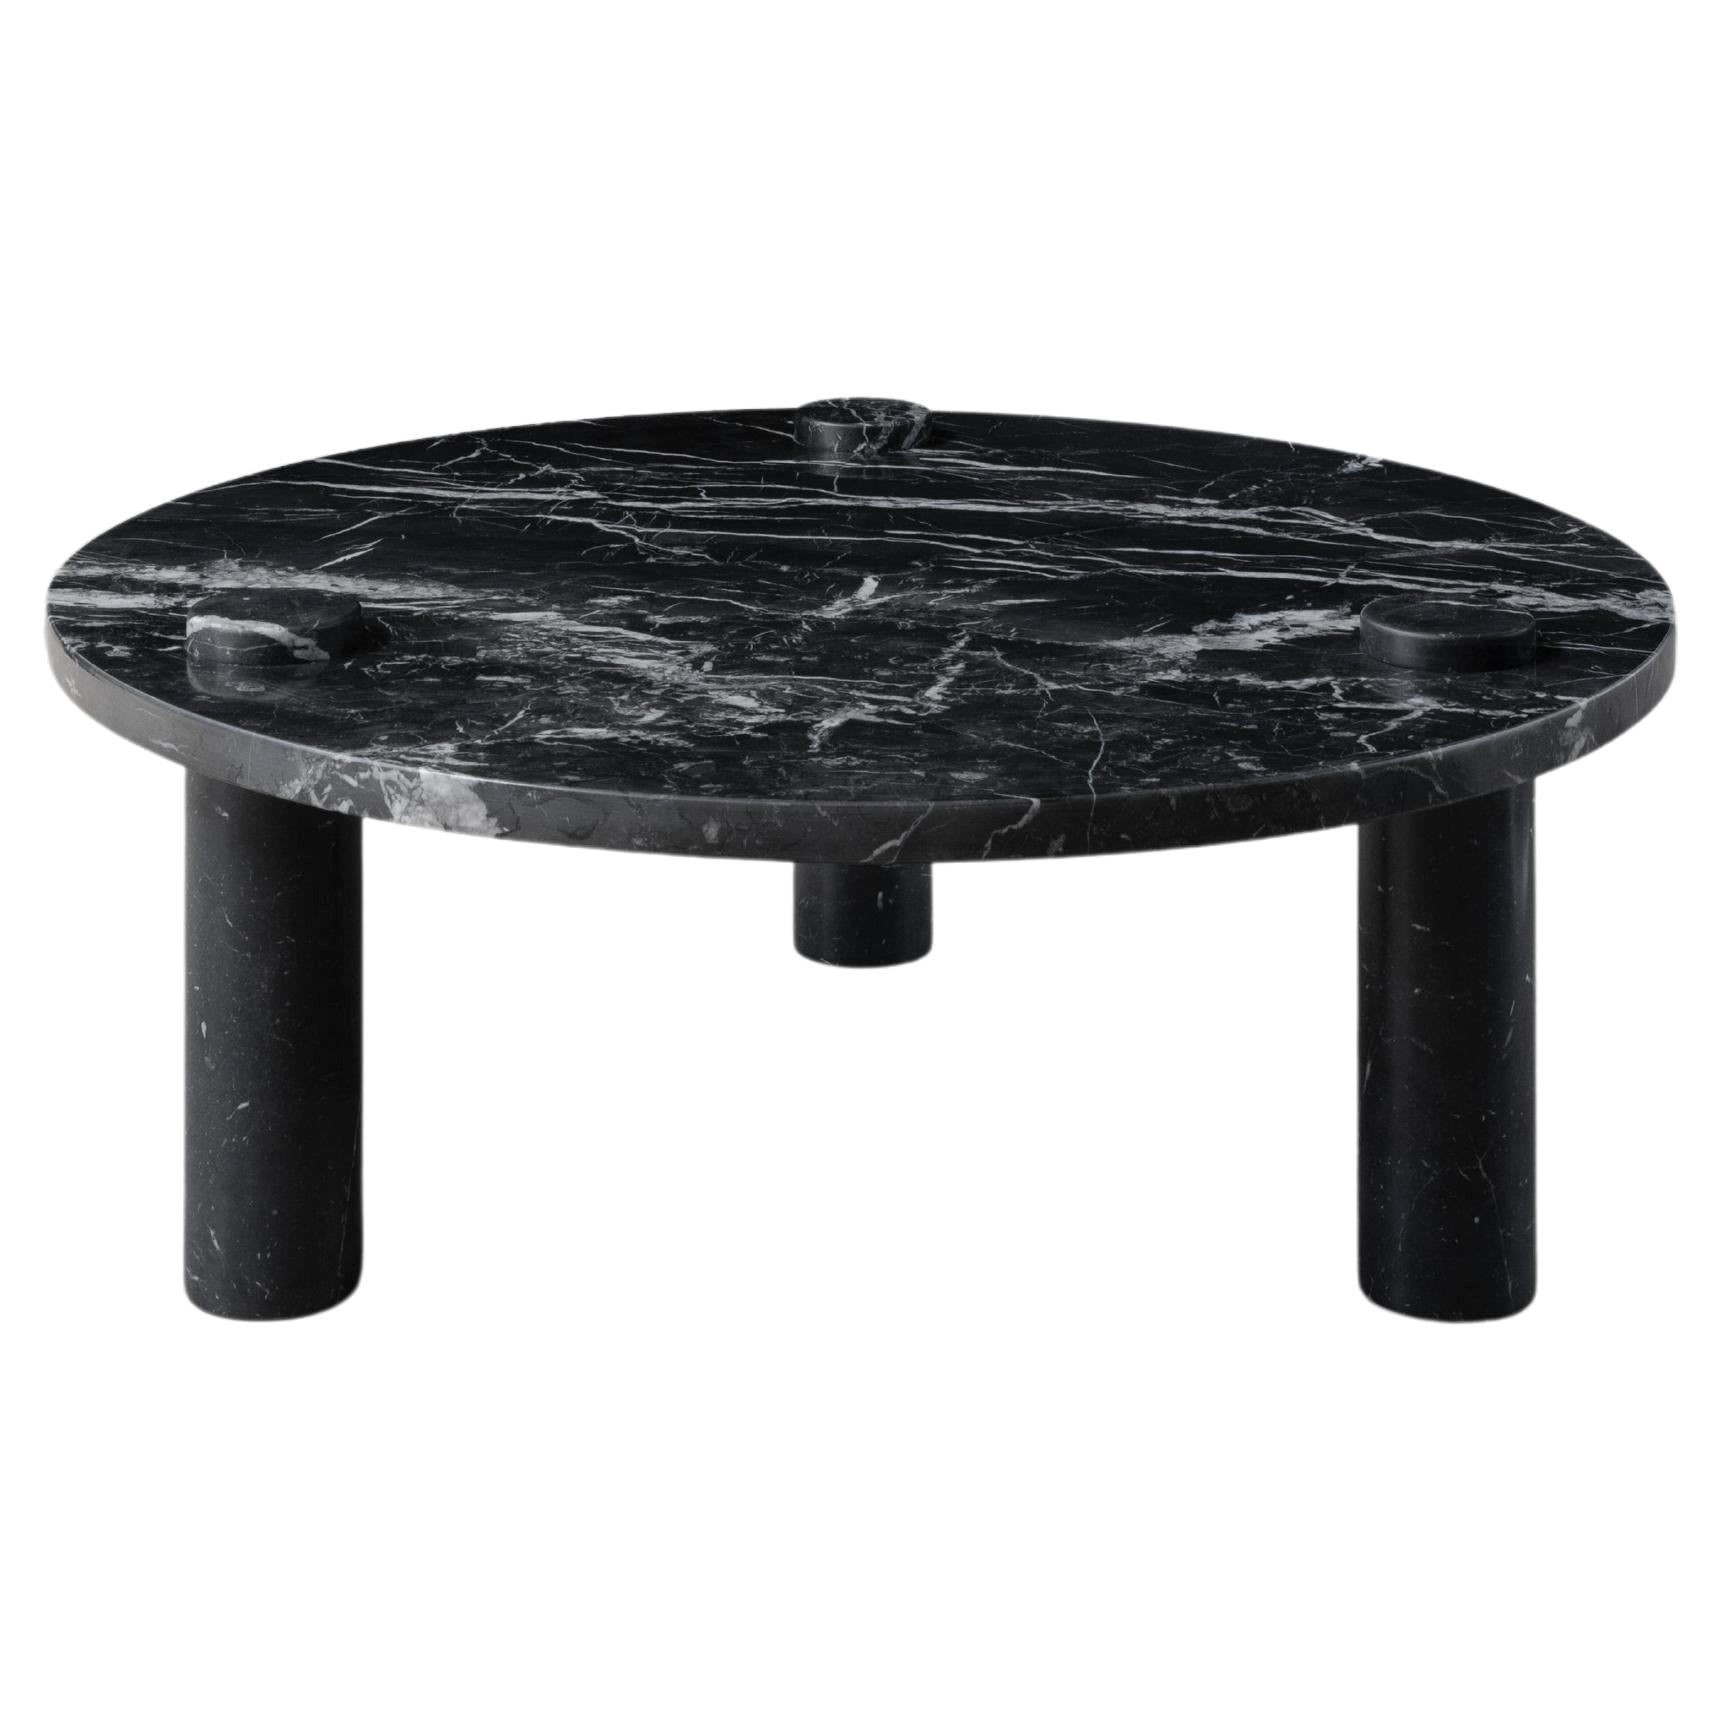 Sienna Marble Coffee Table by Agglomerati